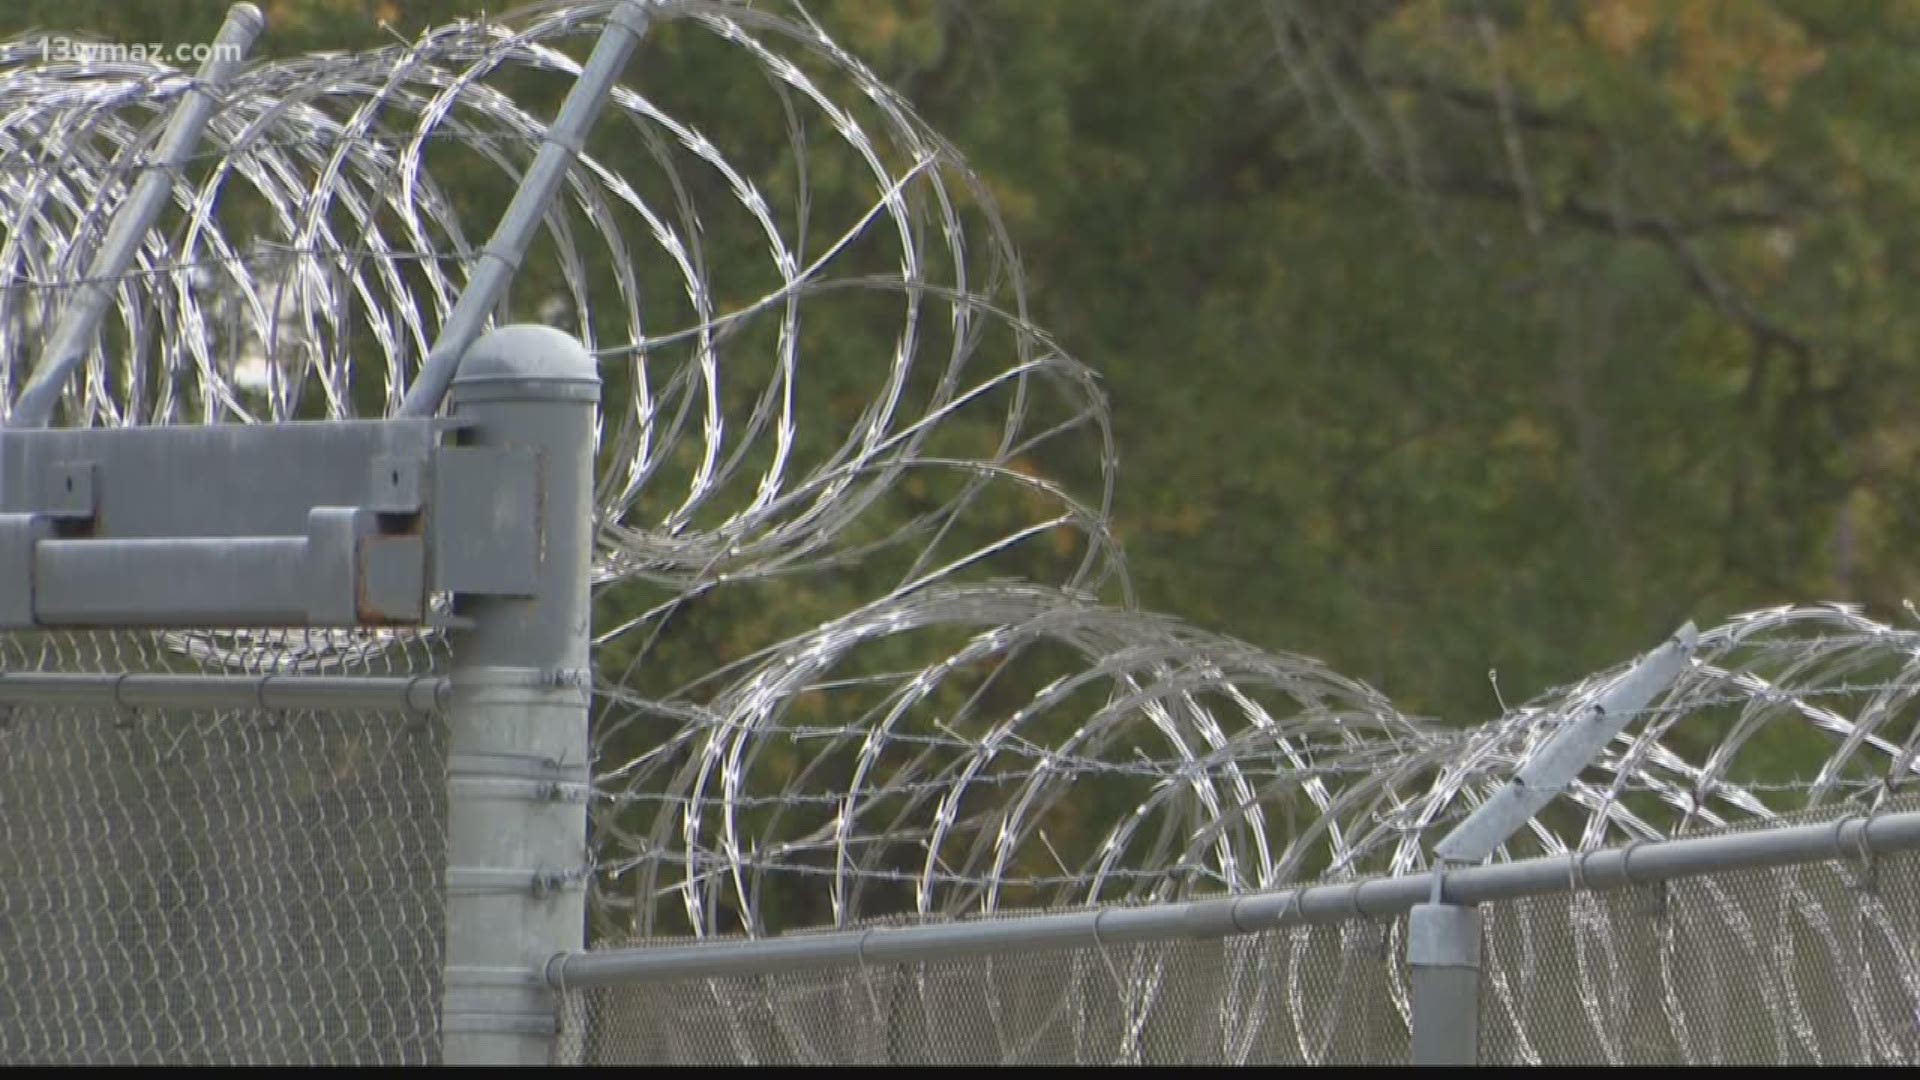 The US Department of Justice says the Macon Youth Detention Center's record is one of the worst in the country.